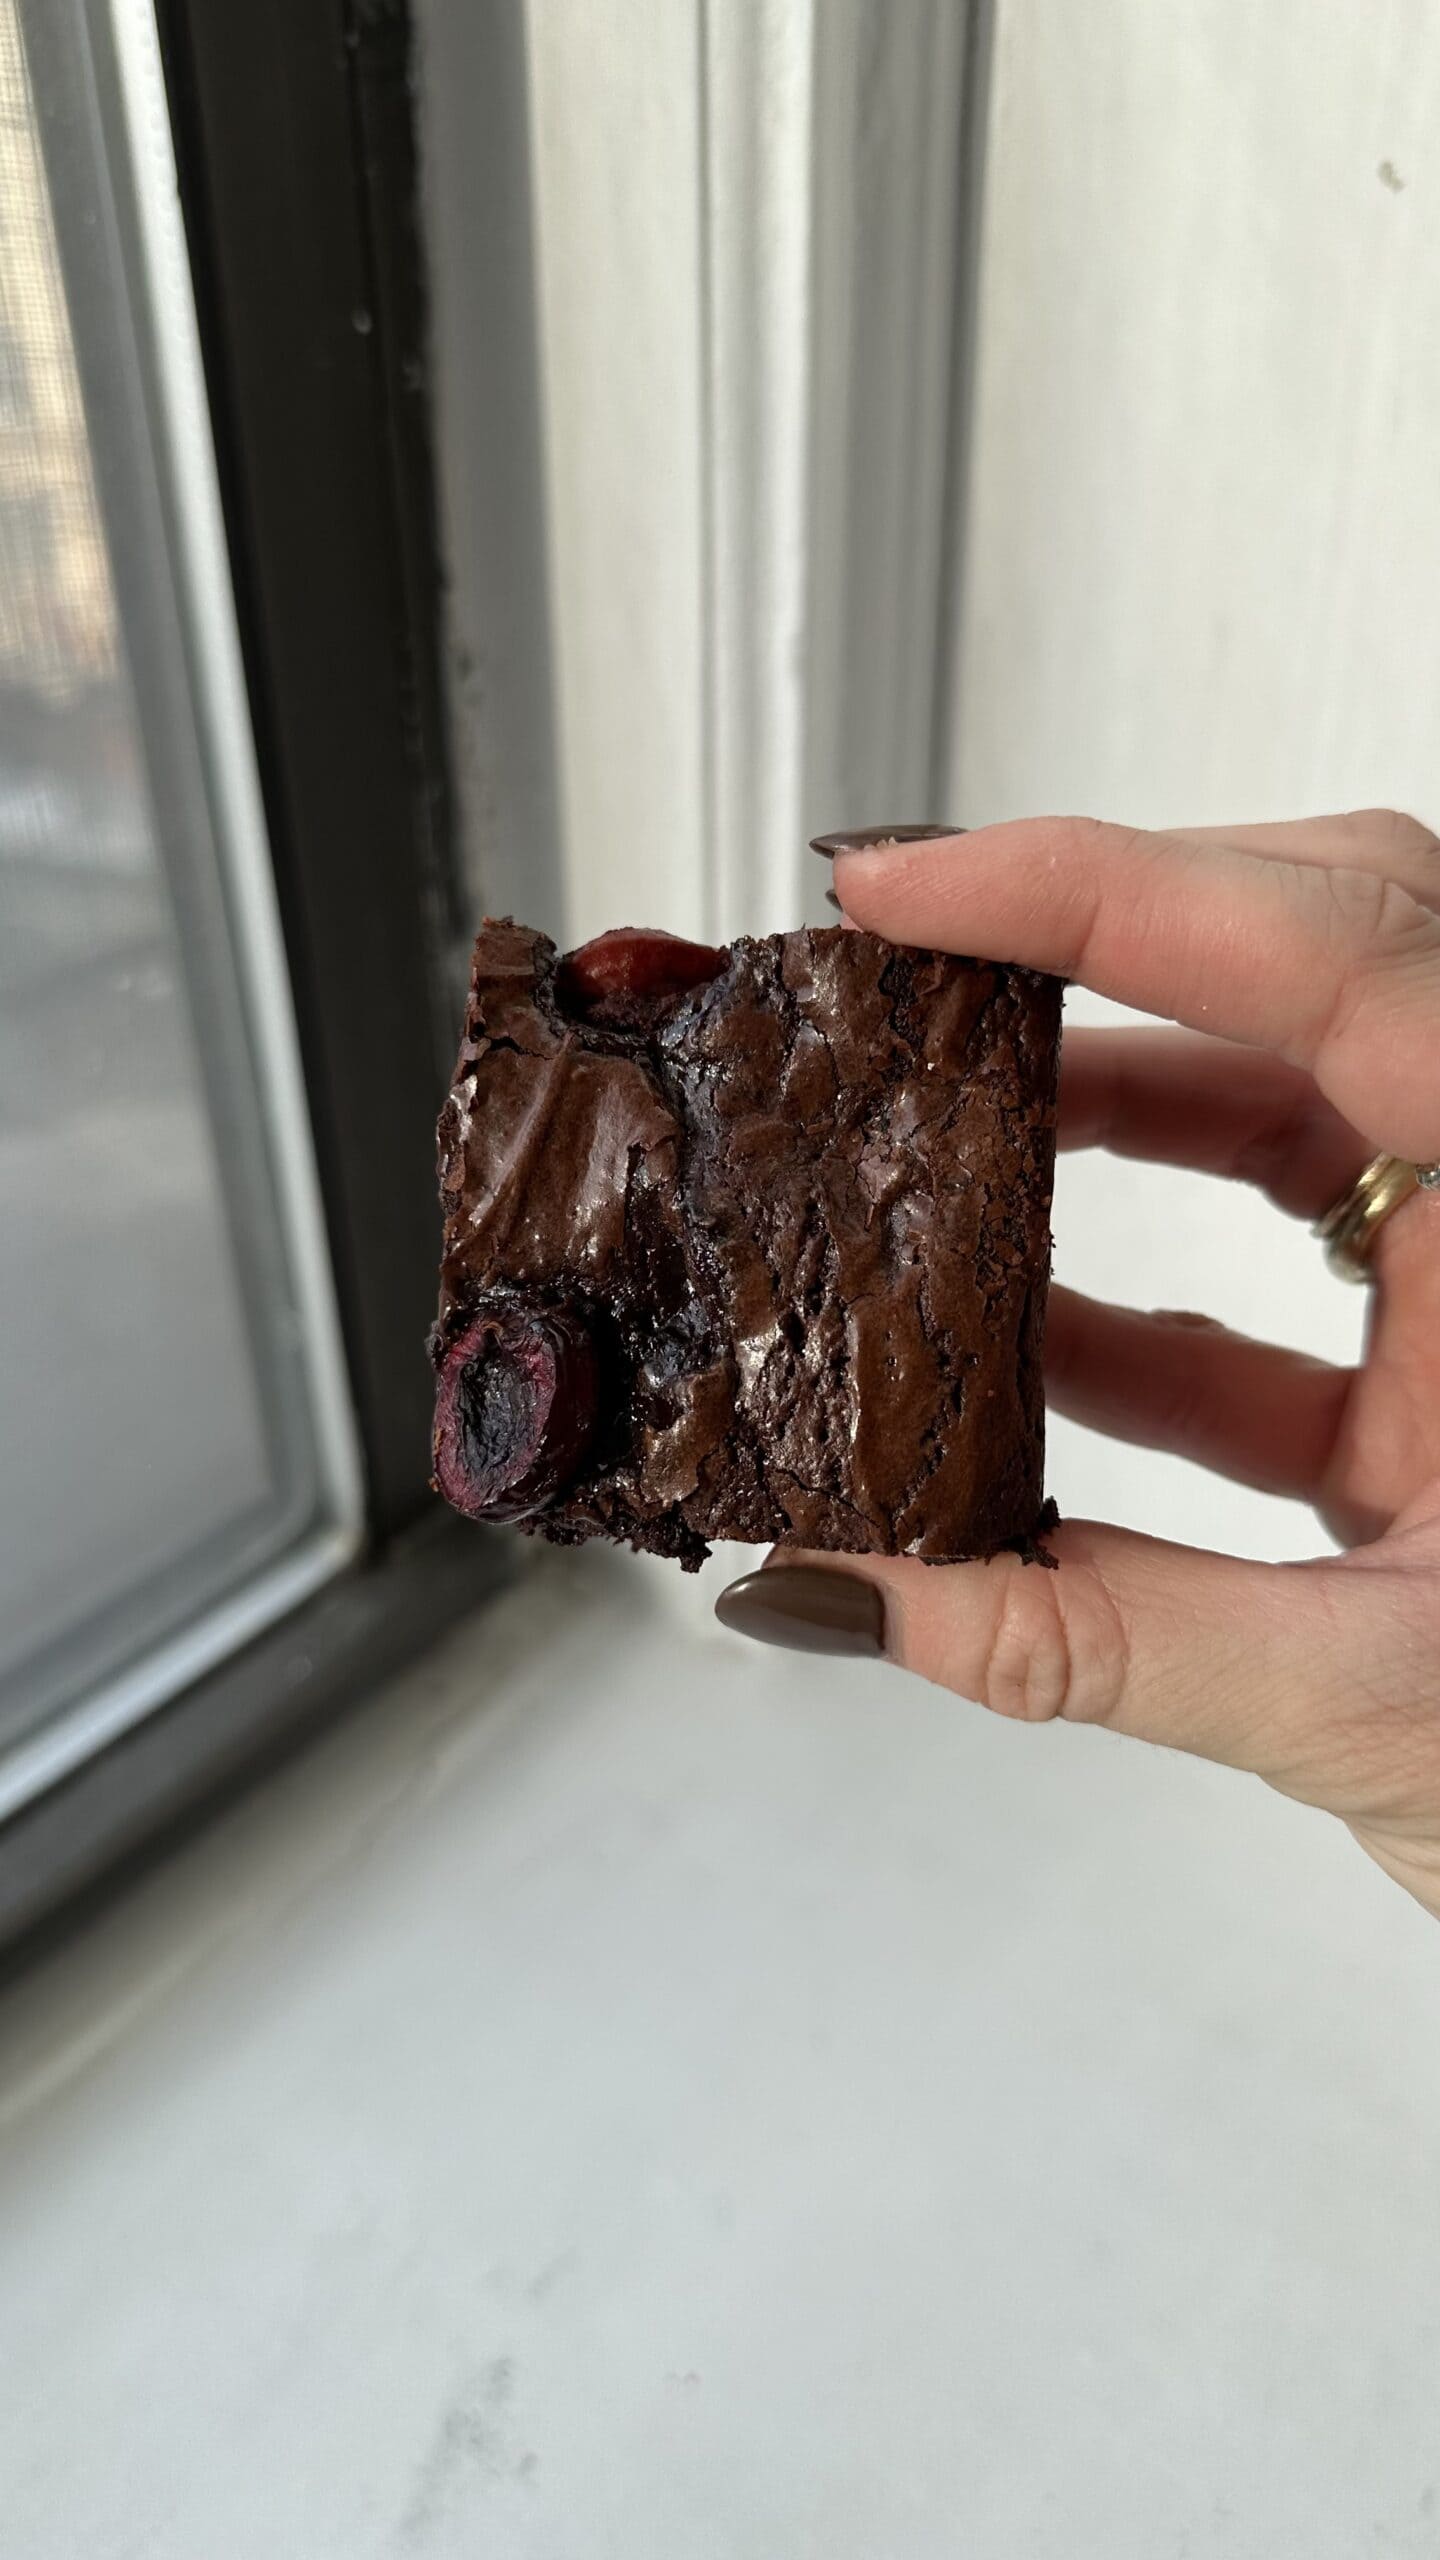 One Black forest brownie being held up so the crinkle top is visible.